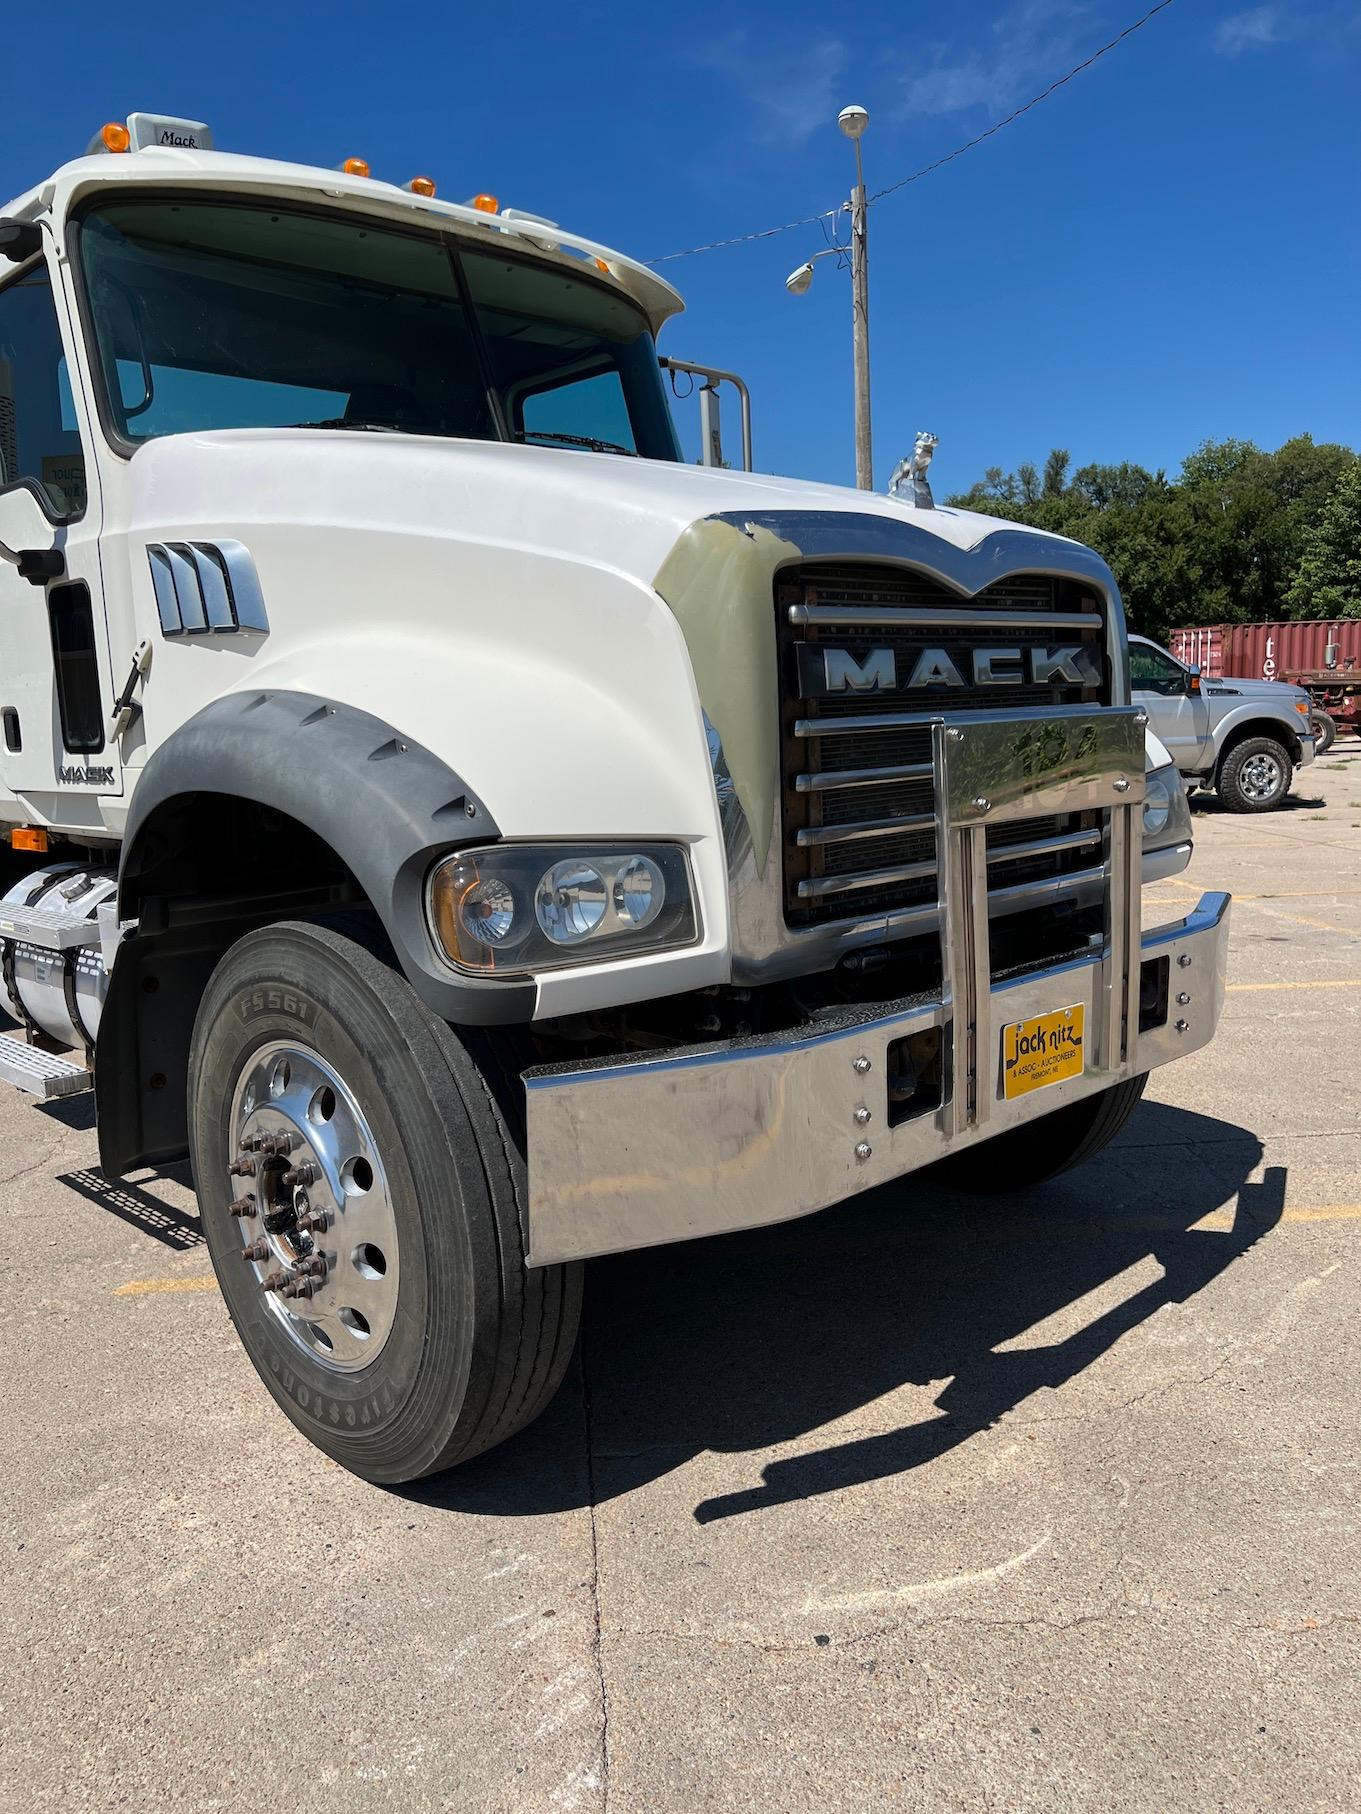 2007 Mack CTP713 Day Cab Truck Tractor